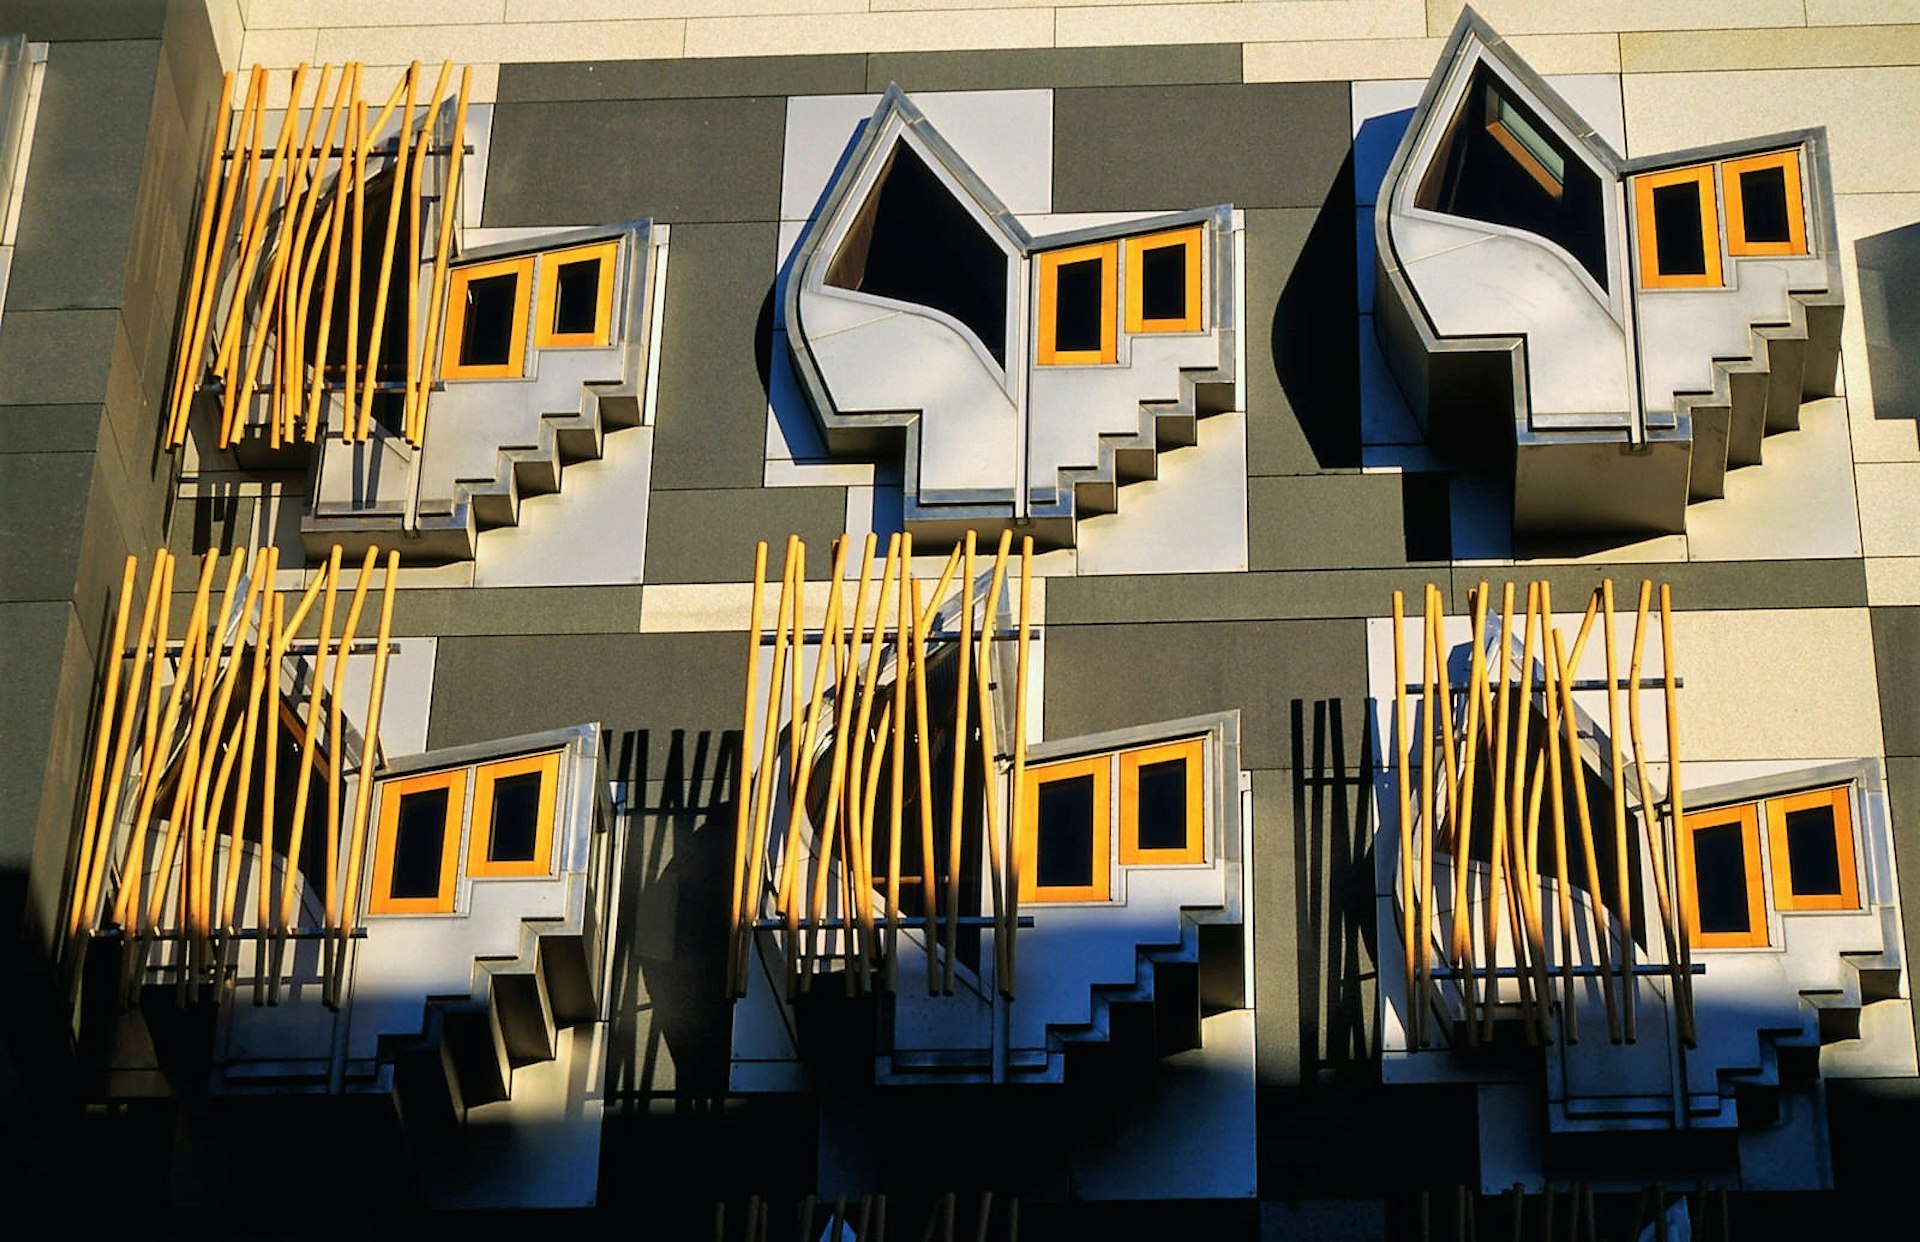 Architectural features on the Scottish Parliament Building